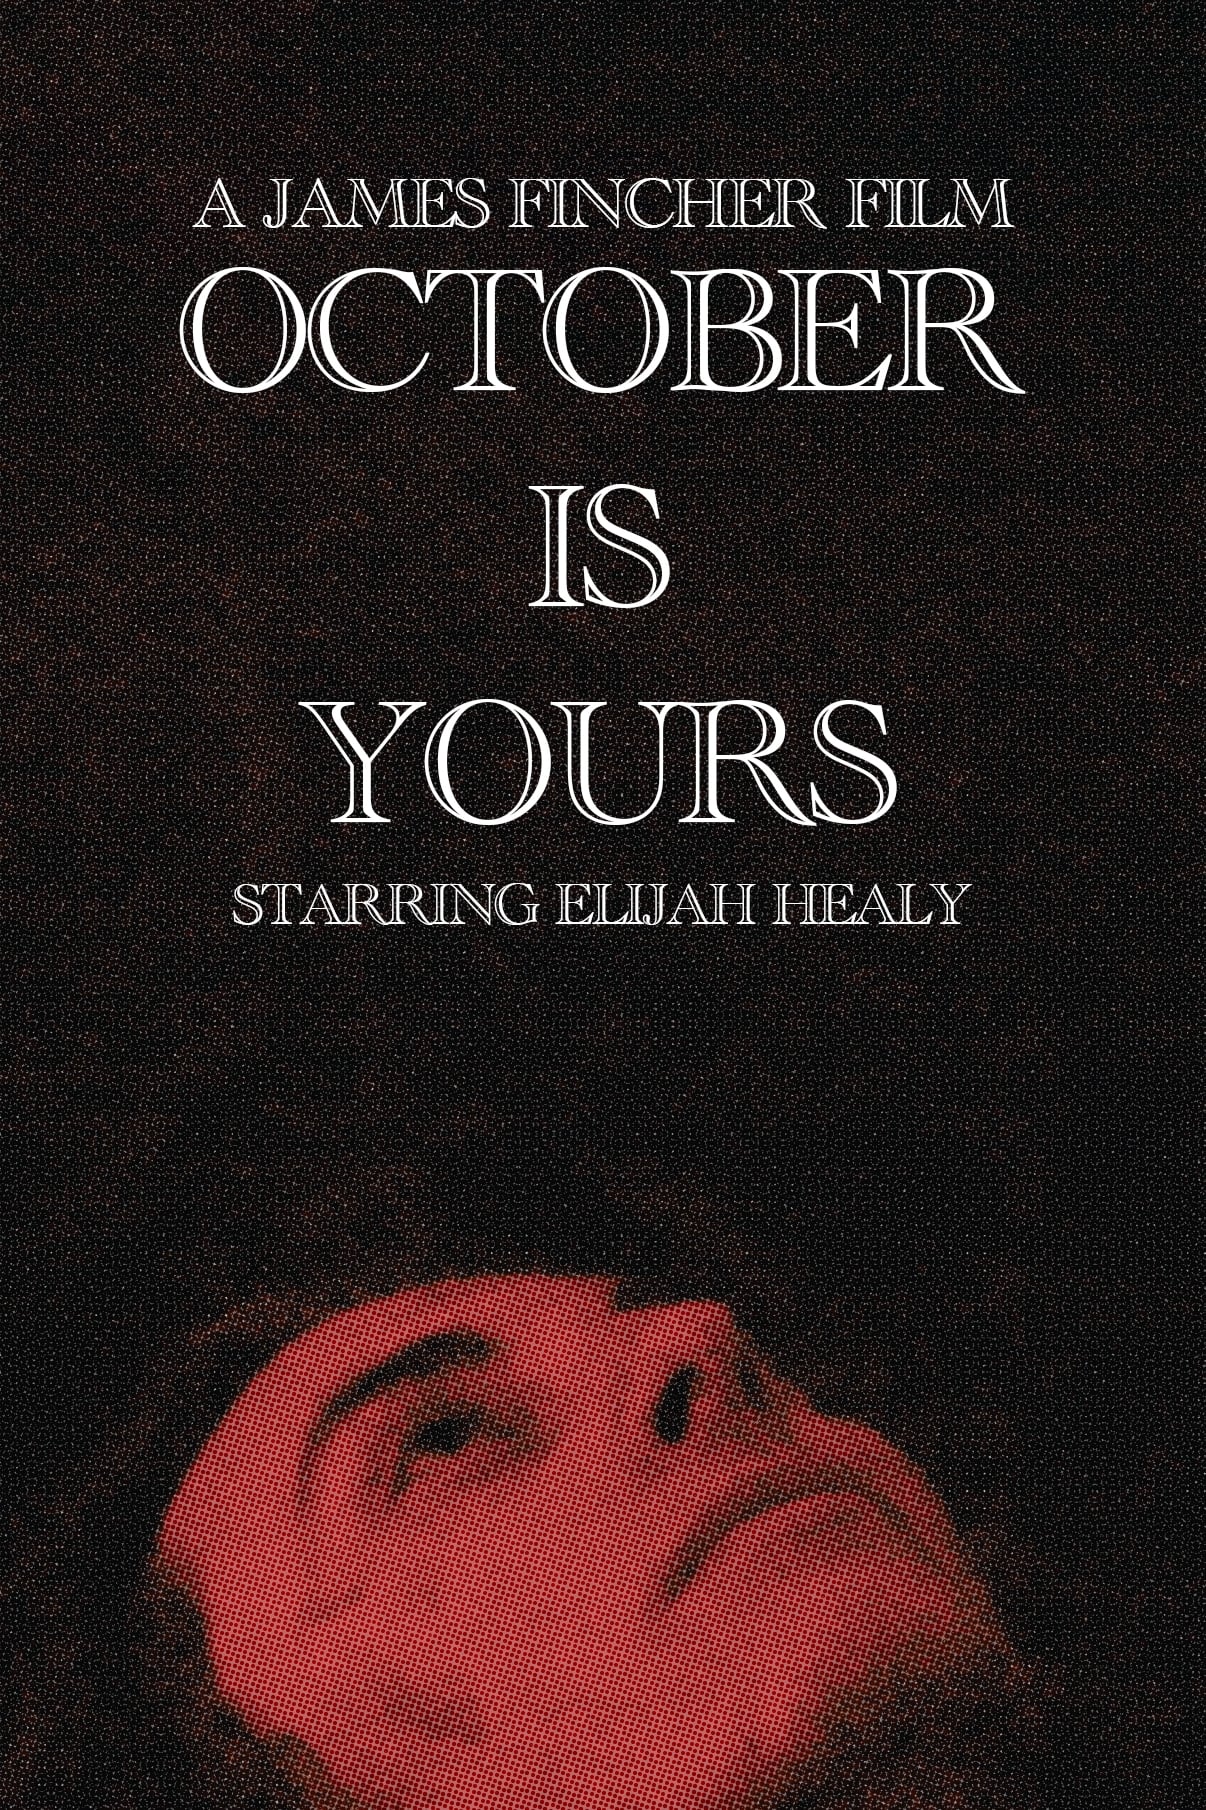 October Is Yours